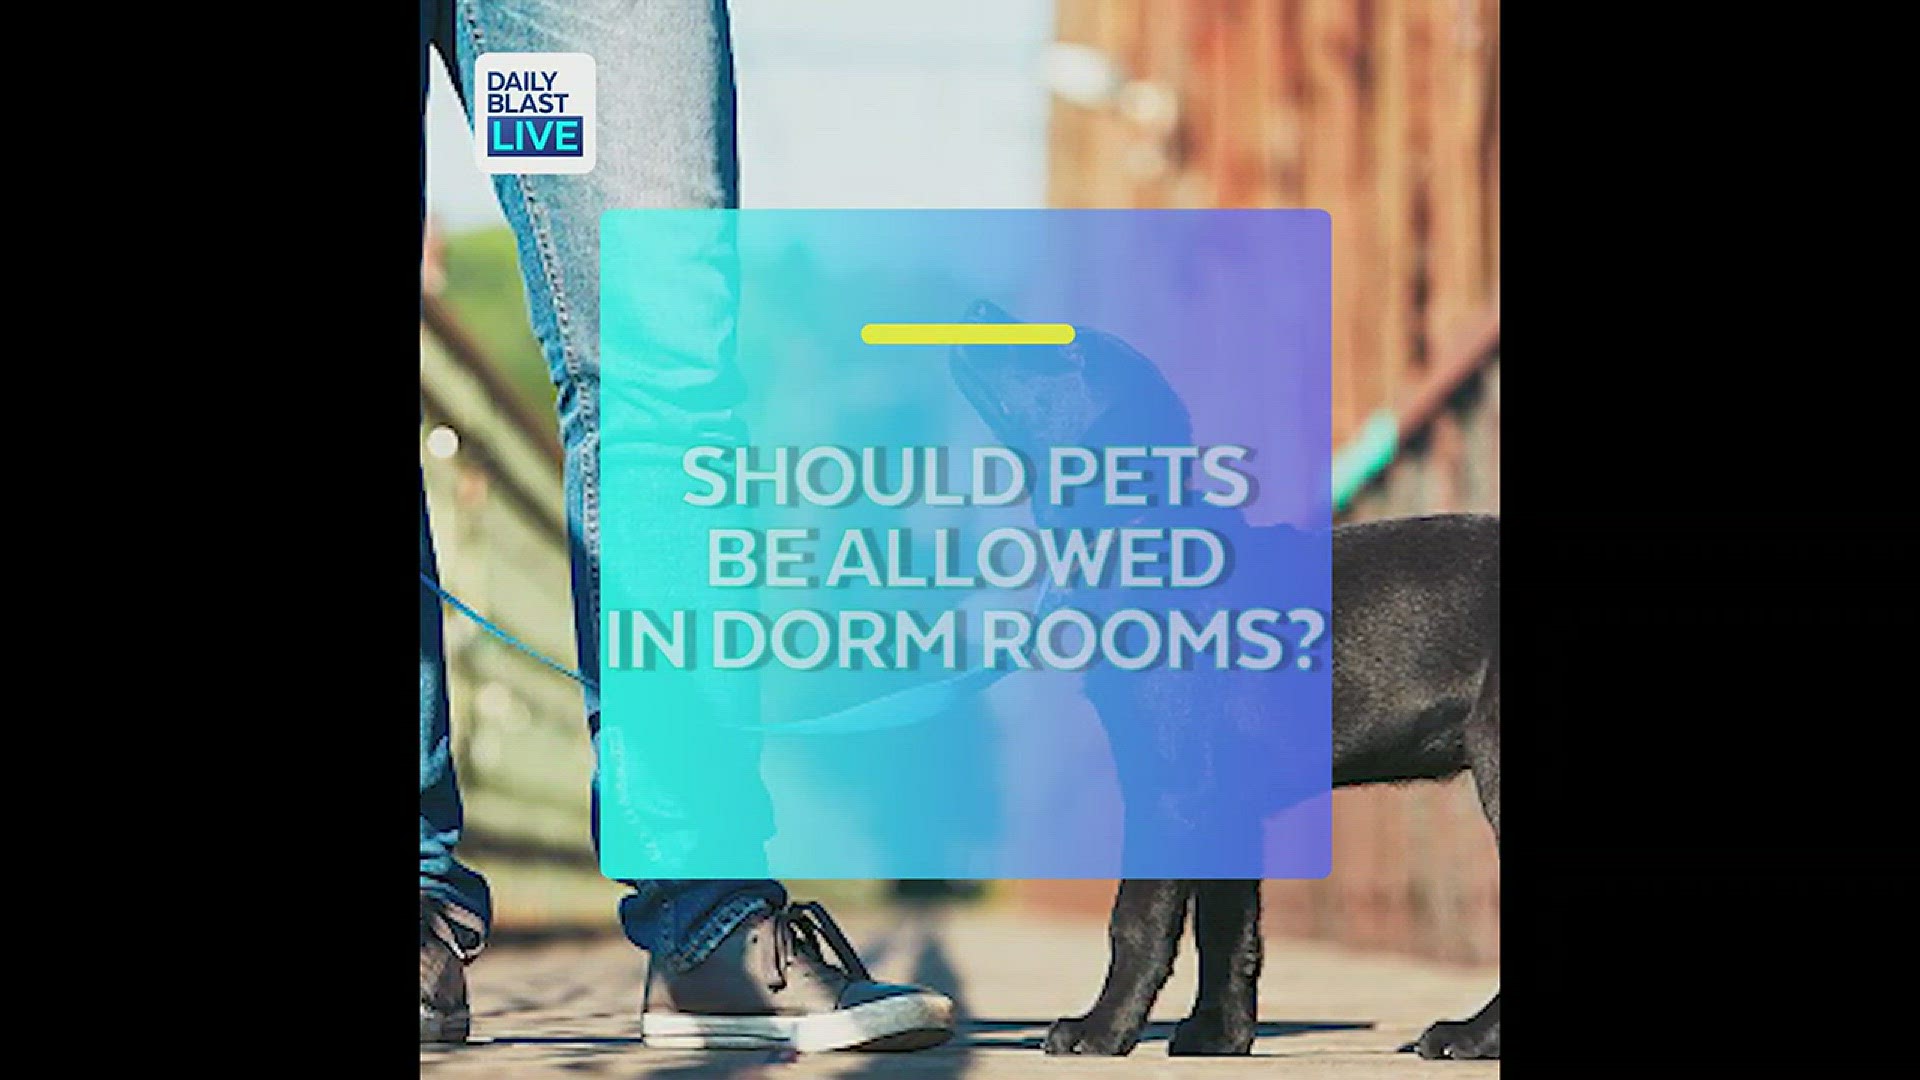 Some colleges are making "pet friendly" dorm rooms.